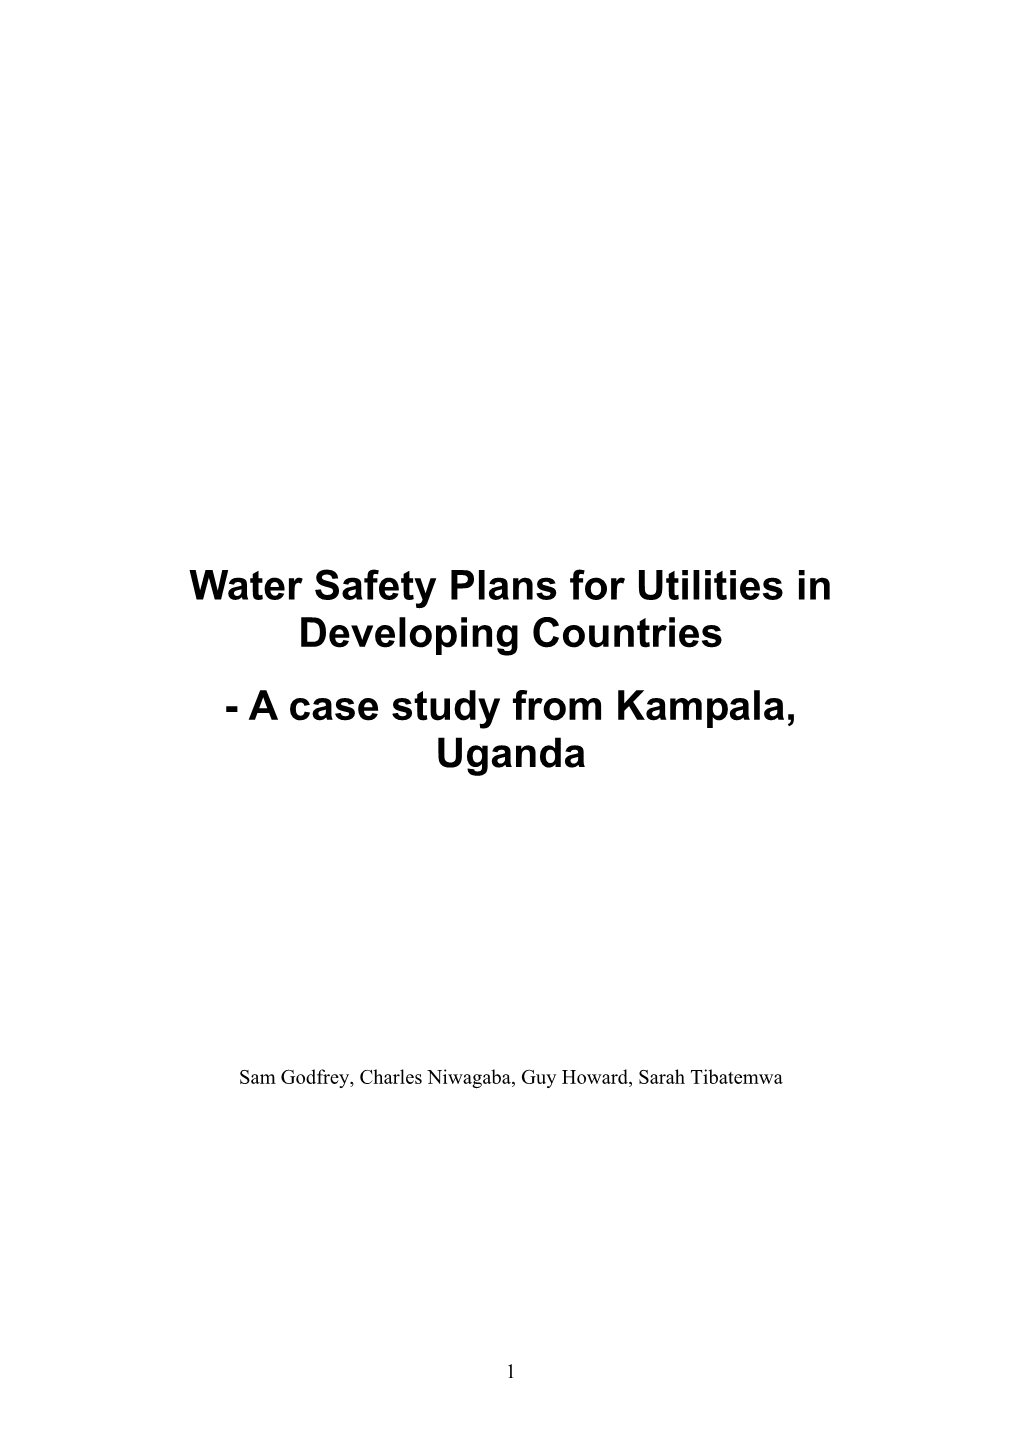 Water Safety Plans for Utilities in Developing Countries - a Case Study from Kampala, Uganda